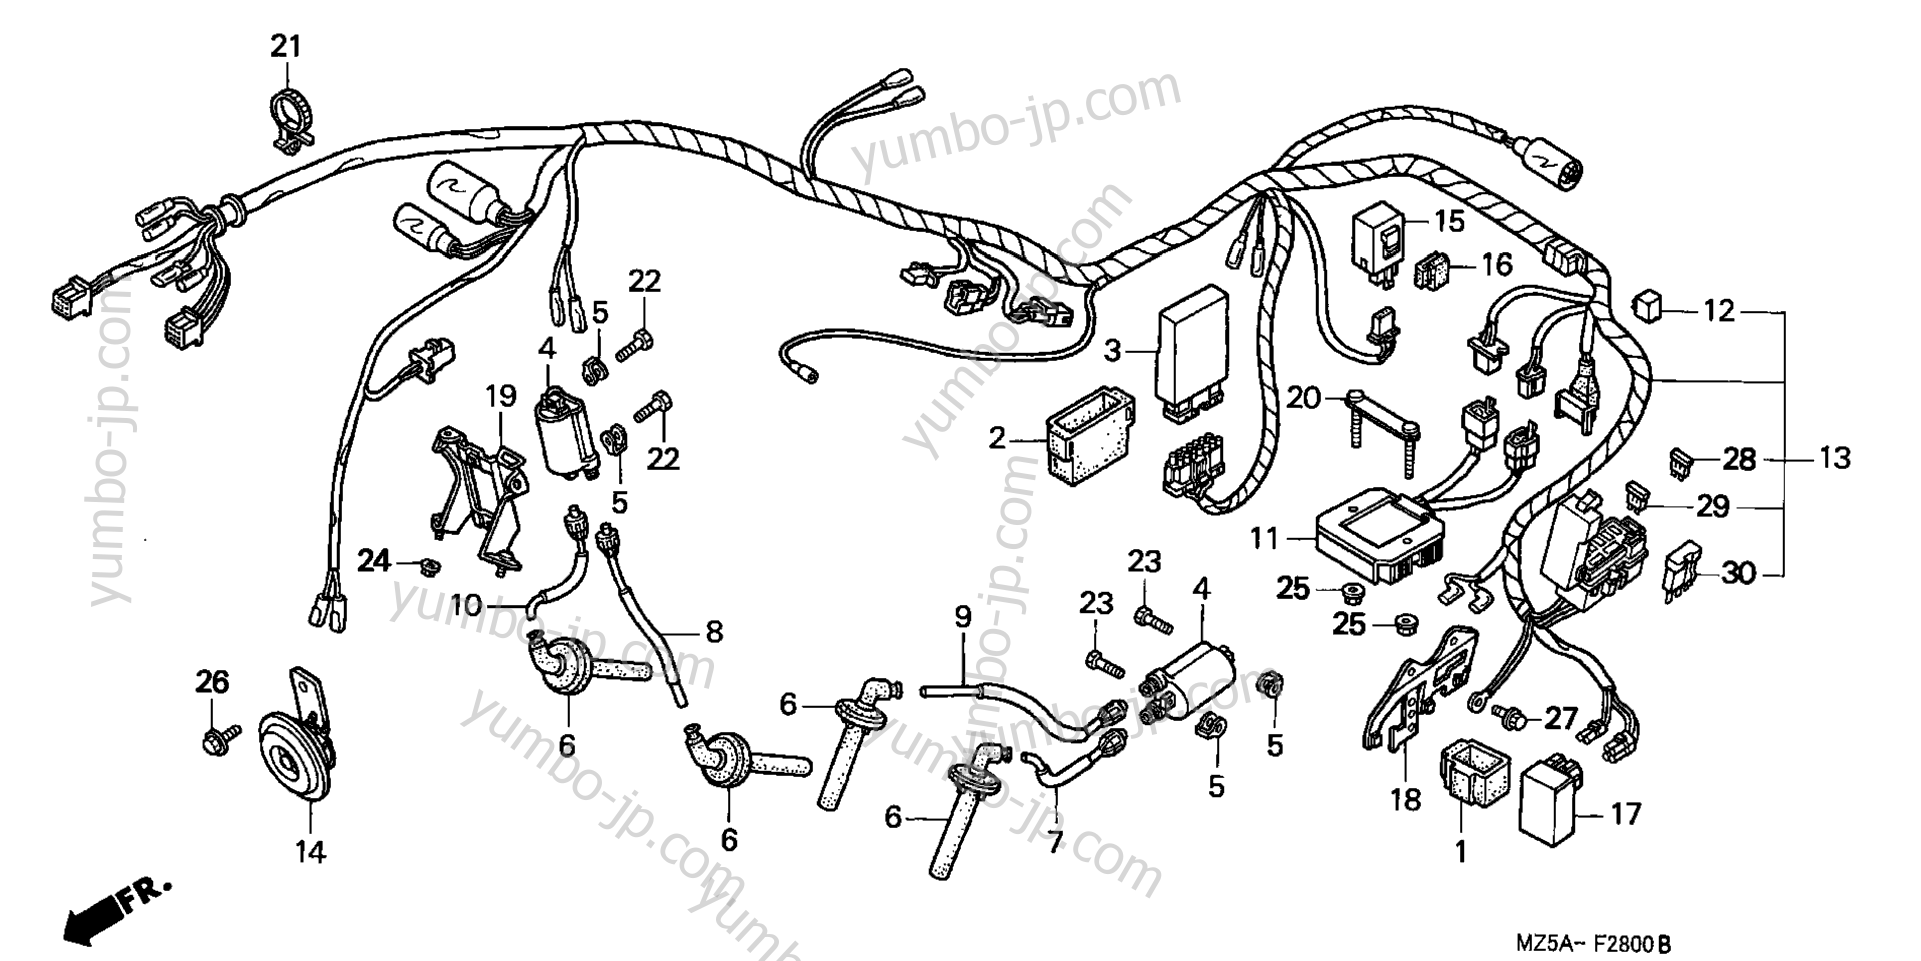 WIRE HARNESS for motorcycles HONDA VF750C A 1998 year